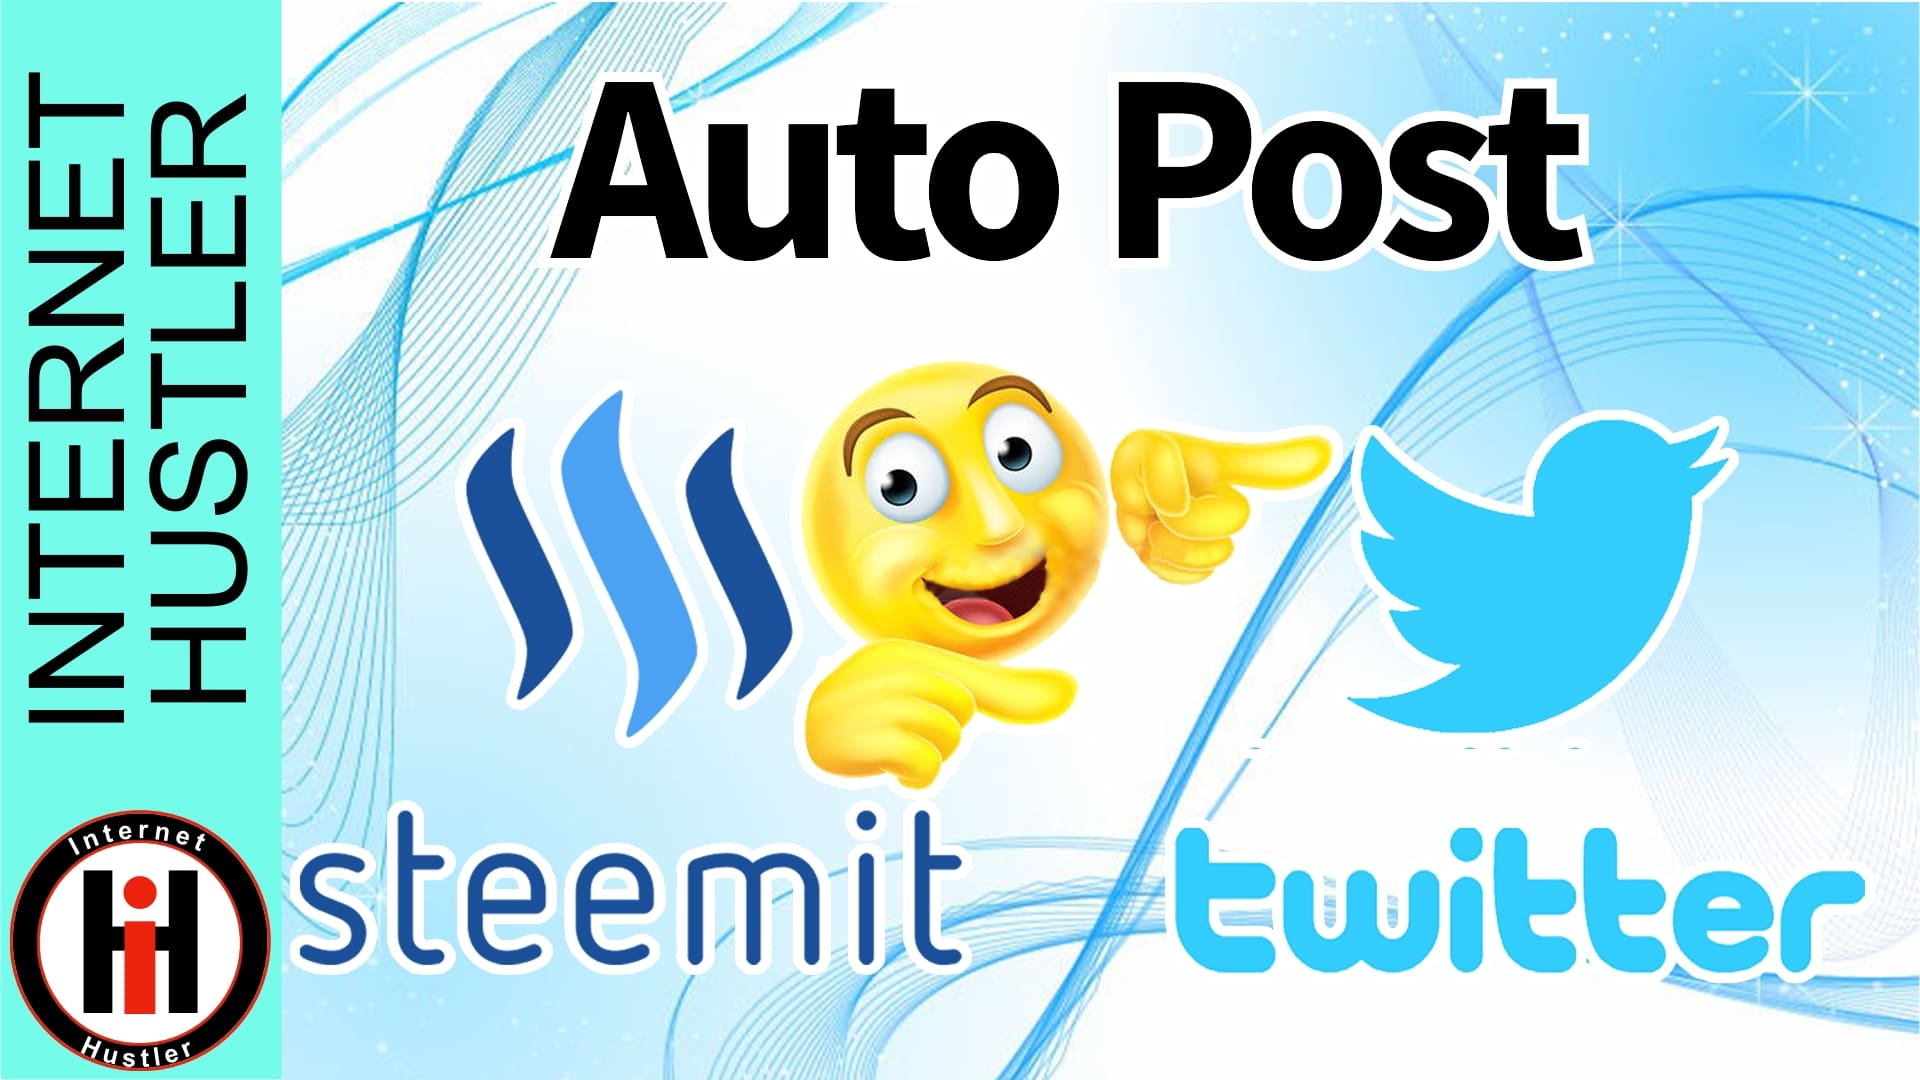 How To Automatically Share Steemit Posts To Twitter Using IFTTT